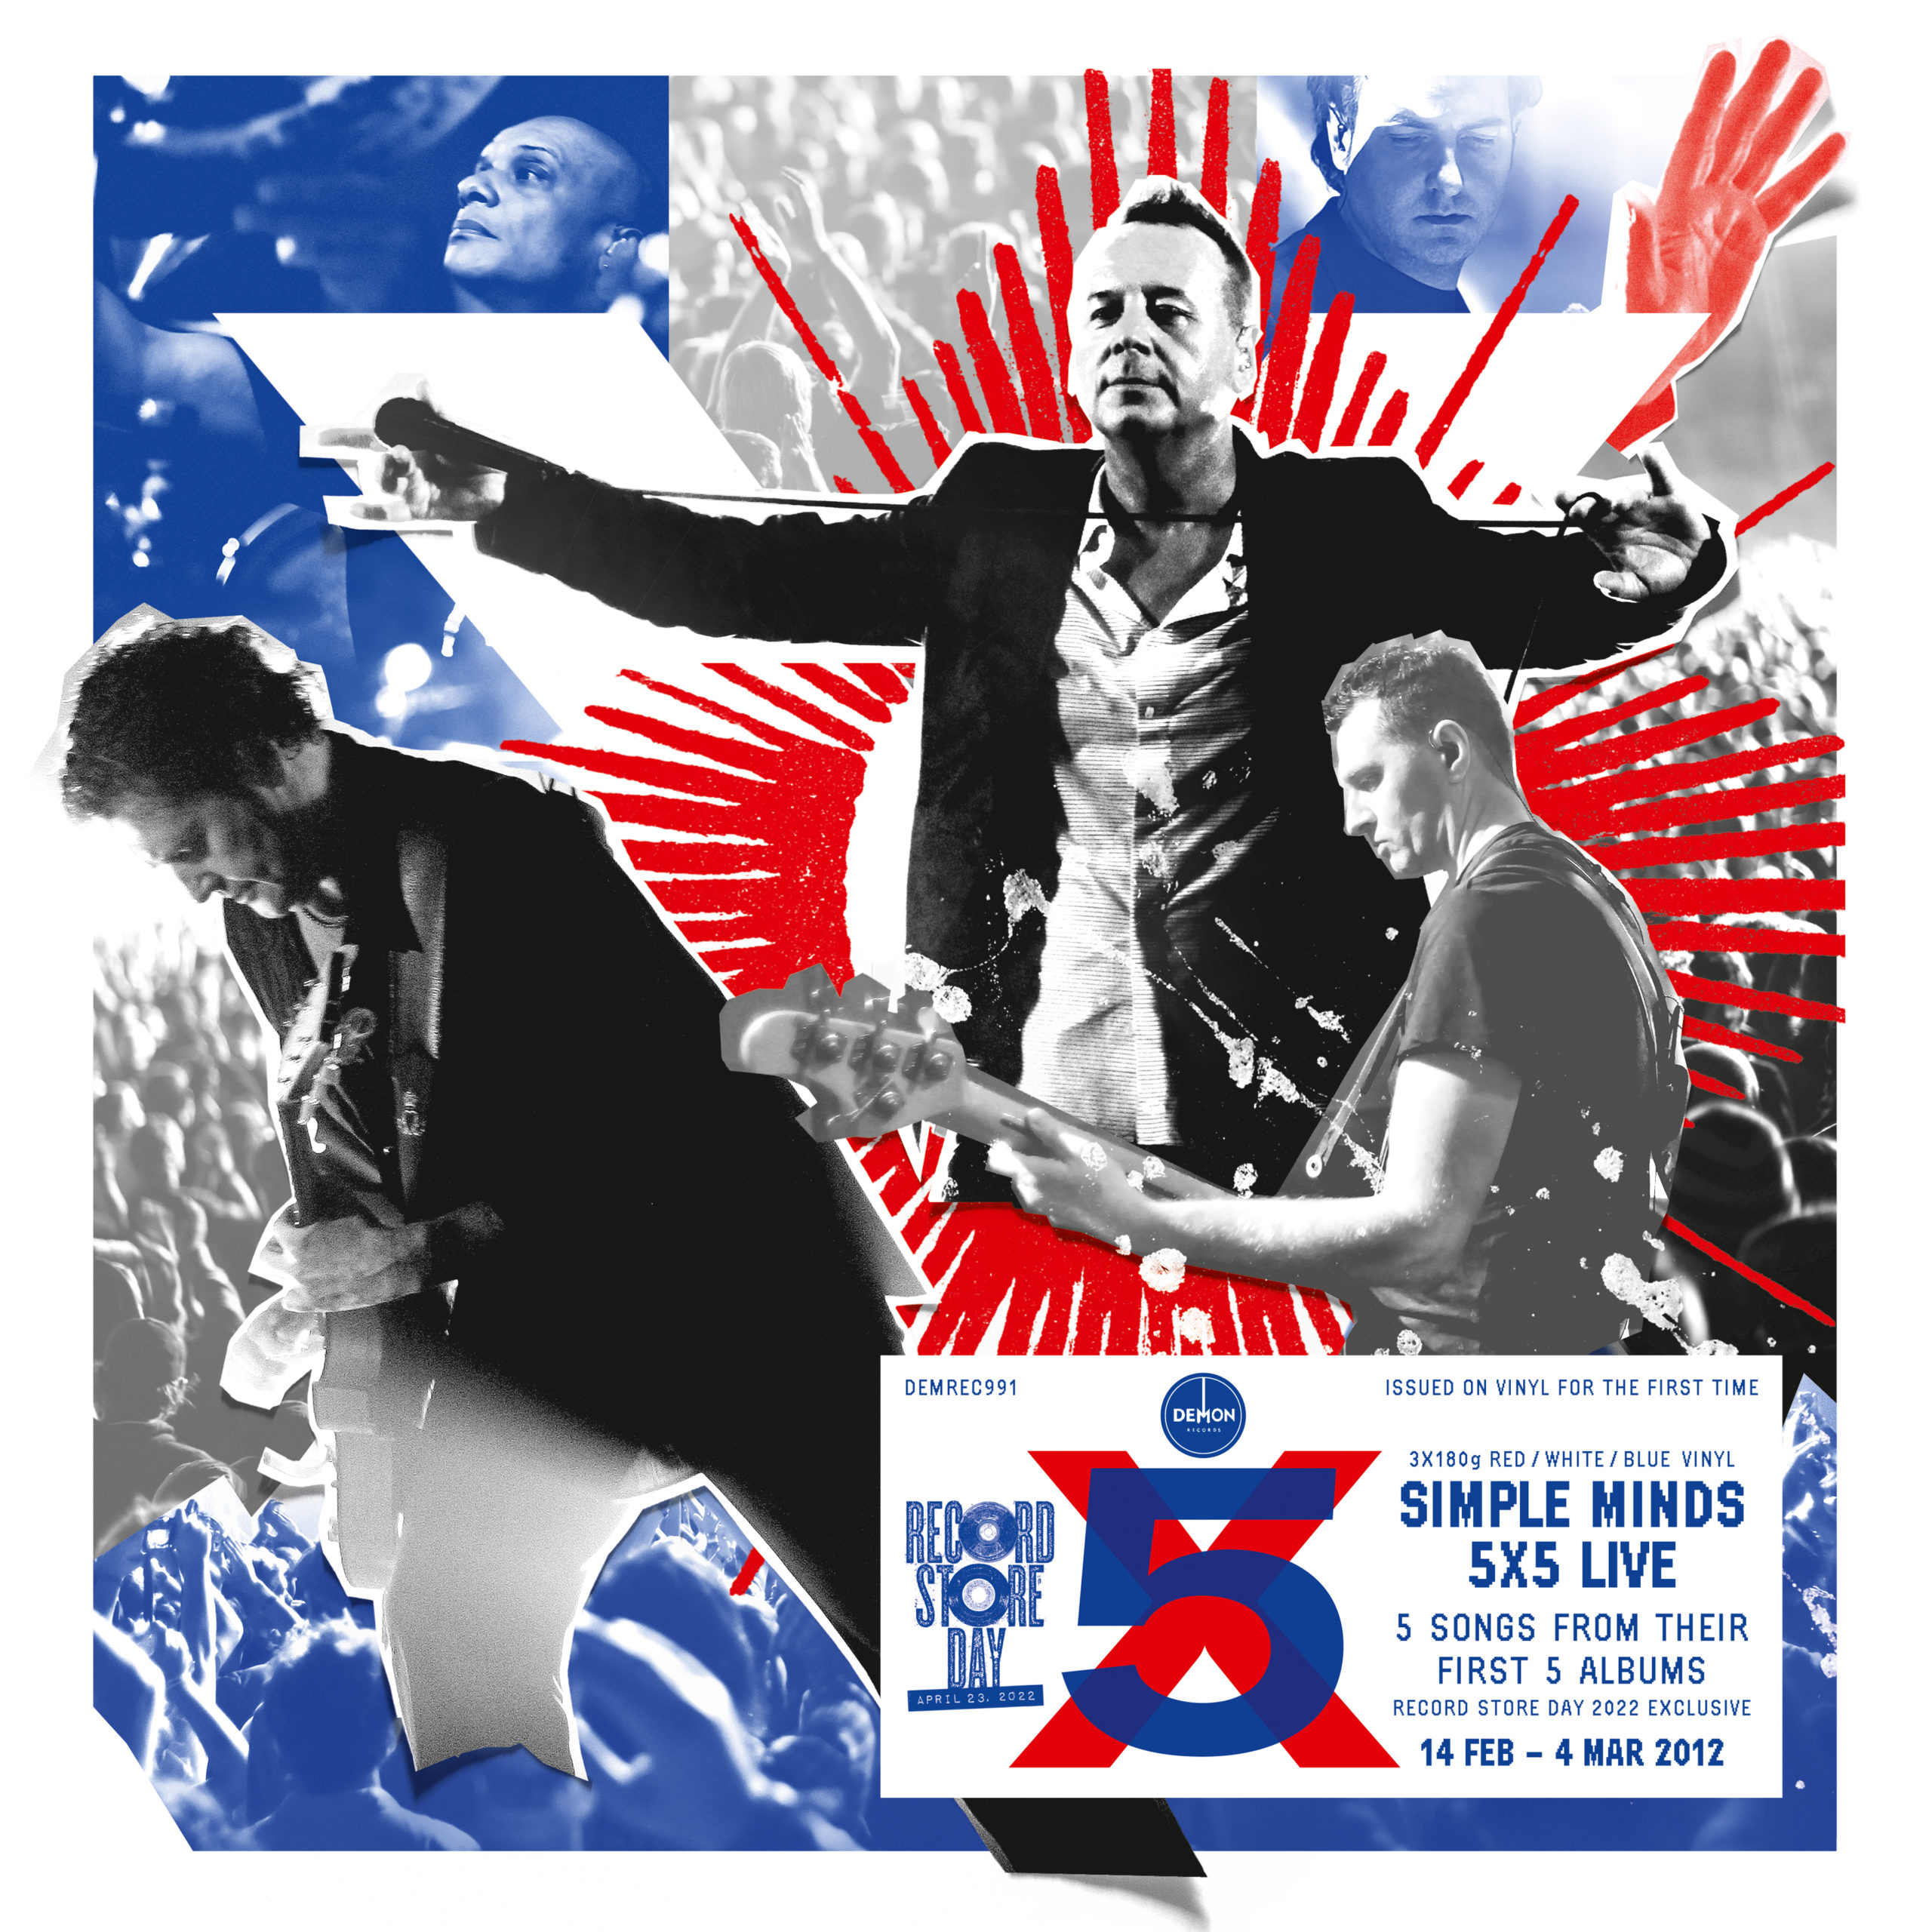 News – Simple Minds – 5X5 Live – Record Store Day